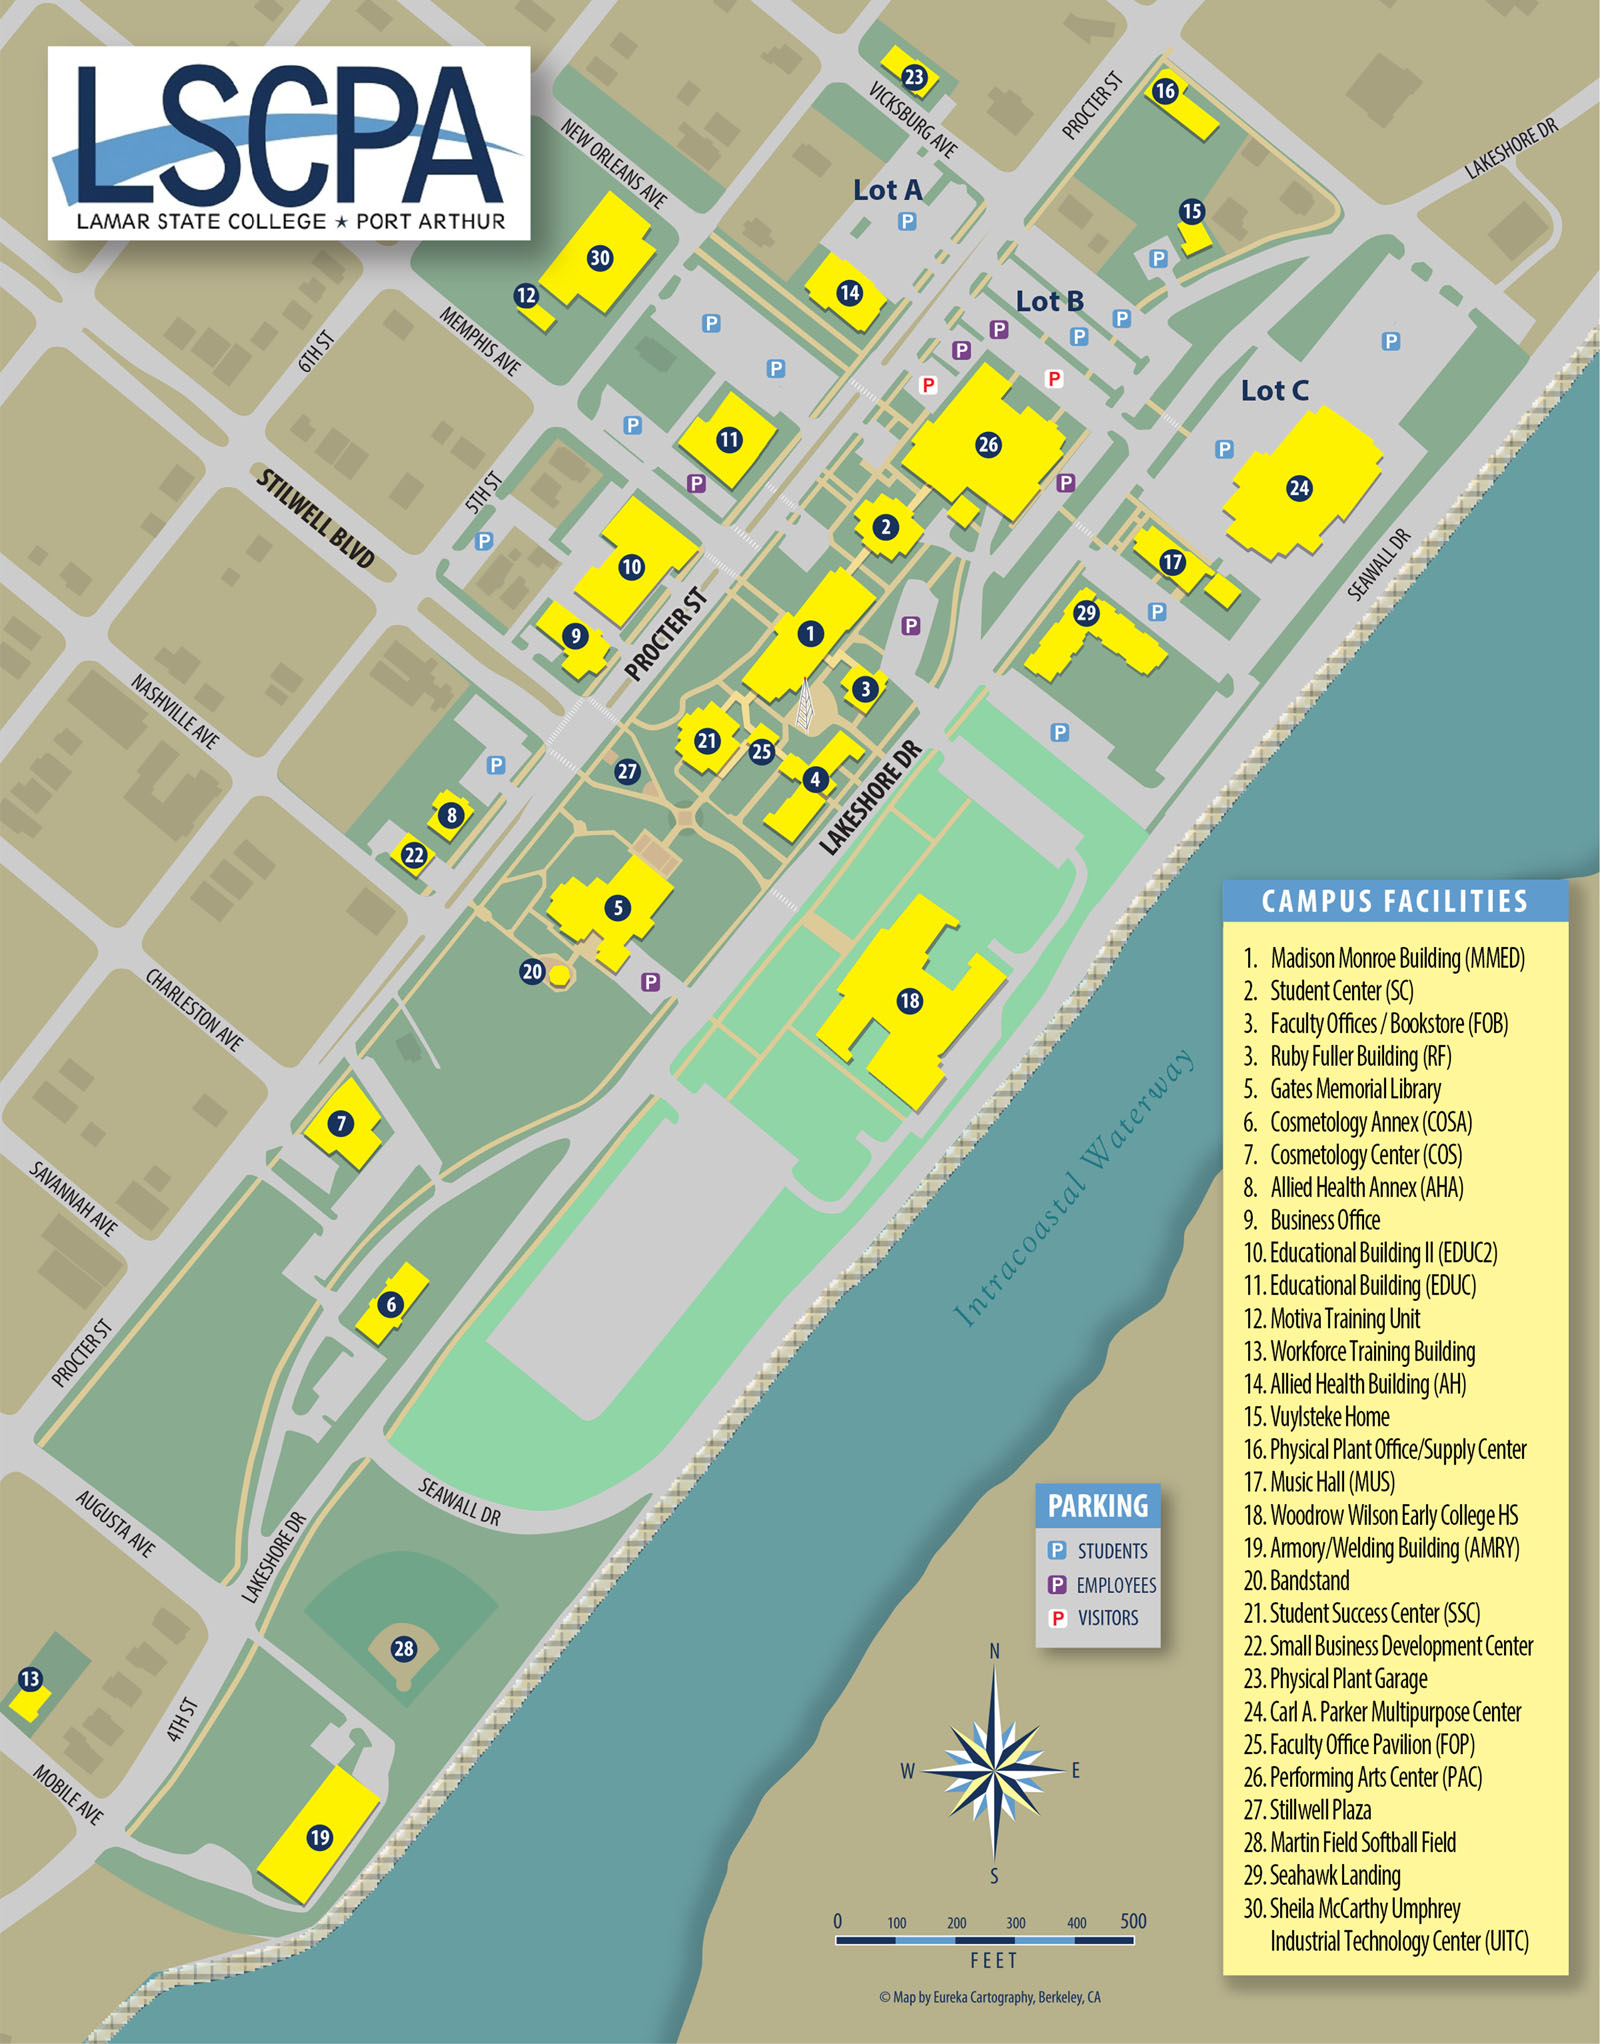 Campus map showing buildings and parking areas.